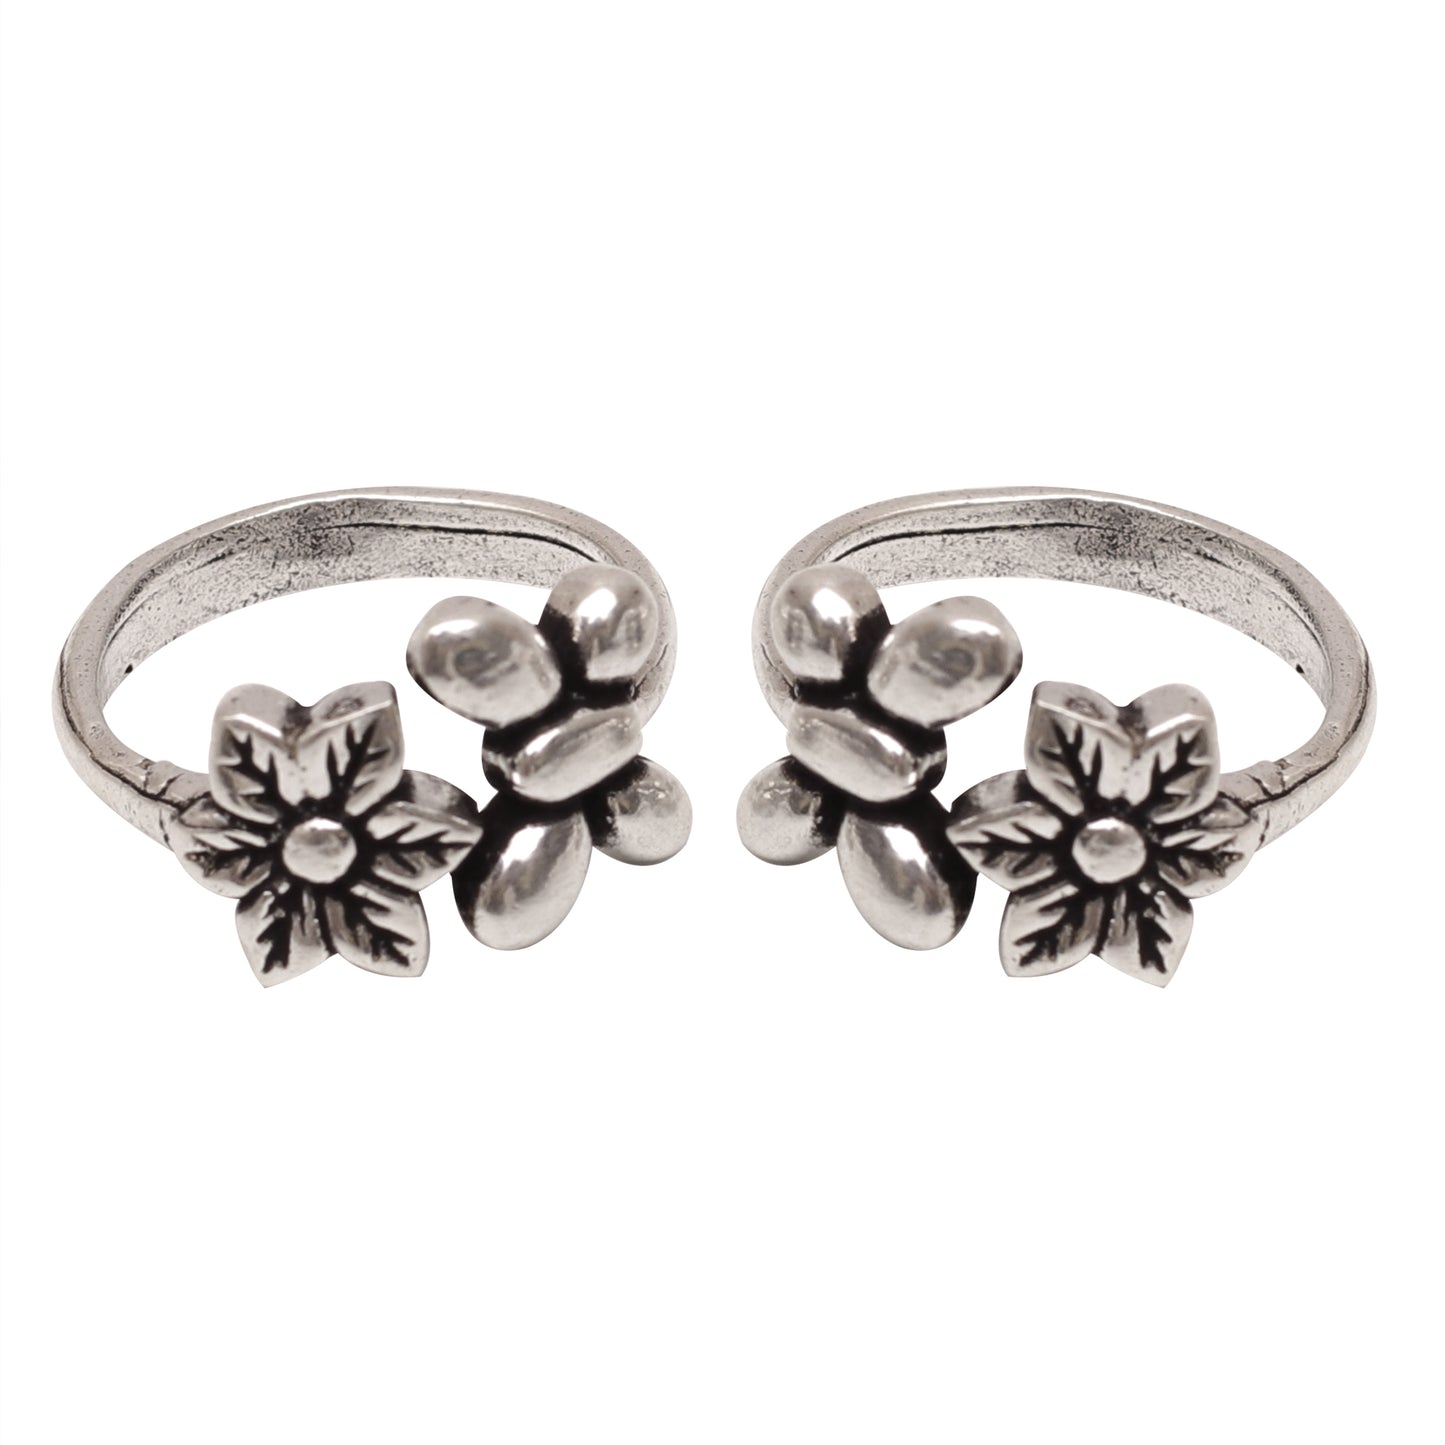 Floral Brass Toe Rings (Set of 2)